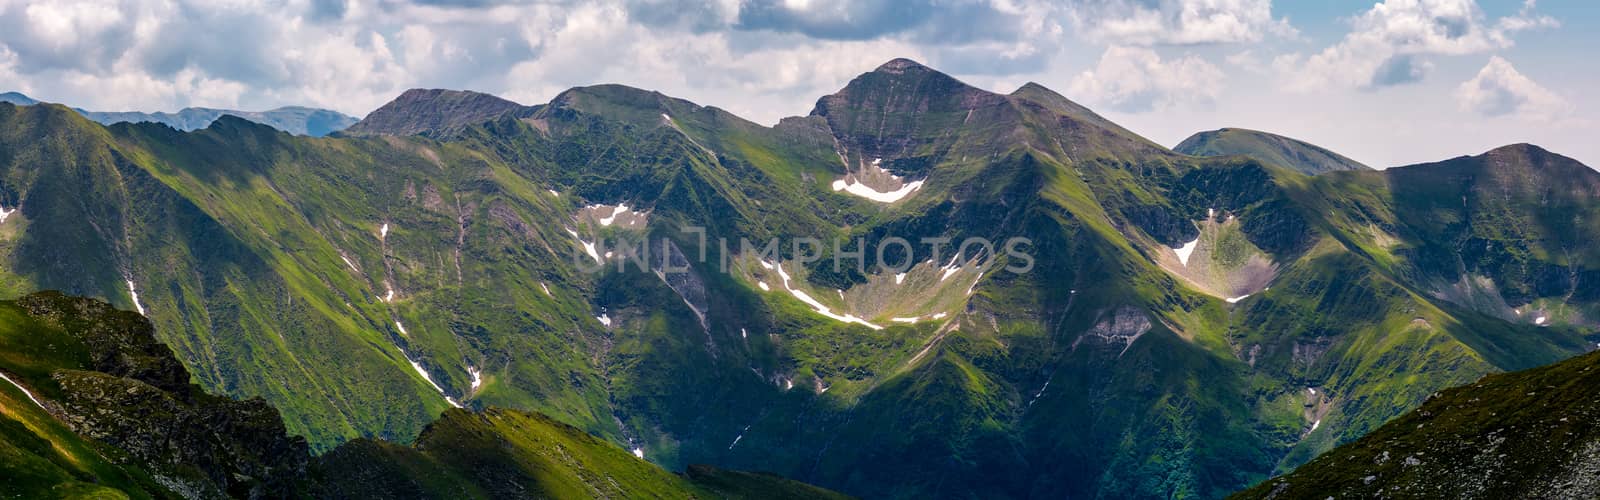 panorama of Fagaras mountain ridge. beautiful landscape with rocky cliffs and grassy slopes in summertime